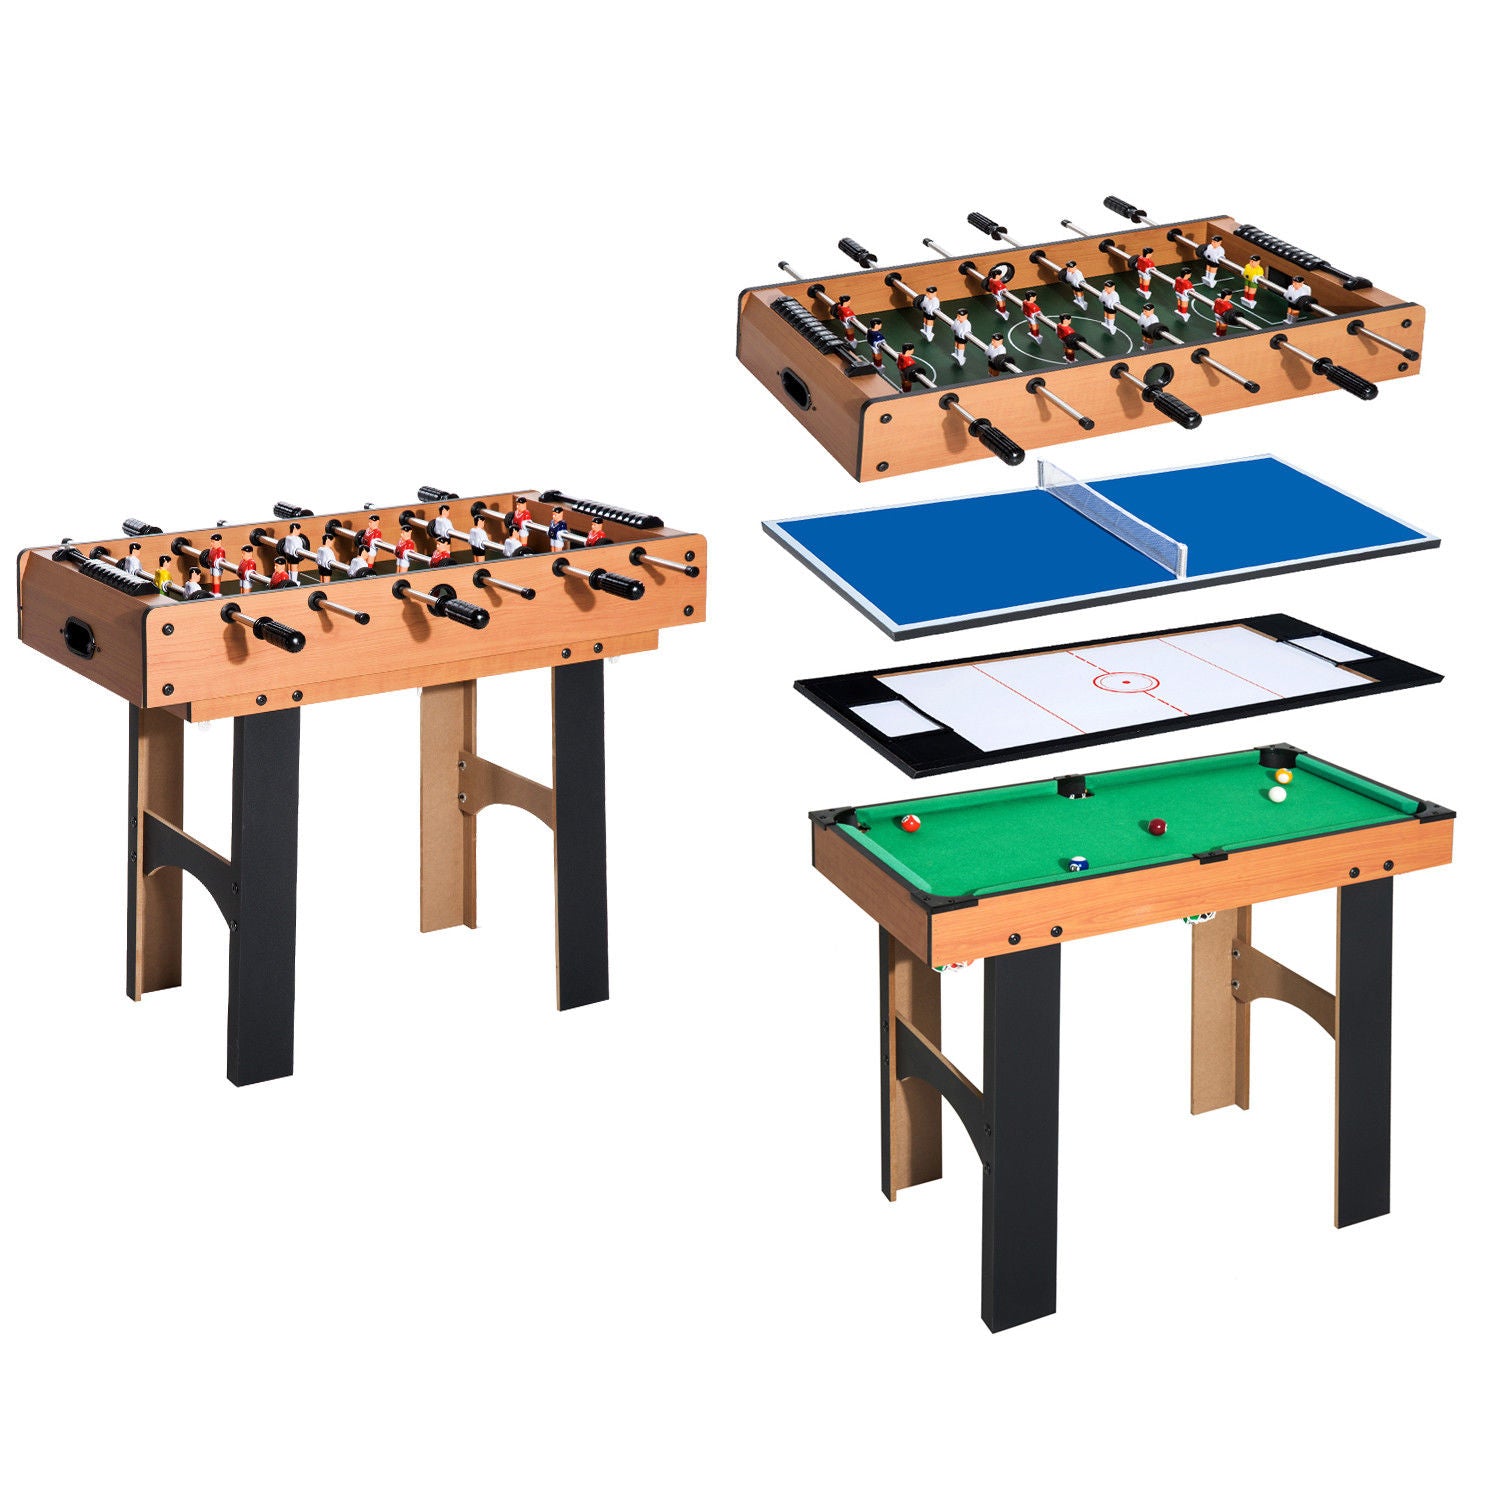 Nancy's Eagan Game table - Table football - Table tennis - Hockey - Billiards - 4-in-1 - MDF - Accessories - Compact